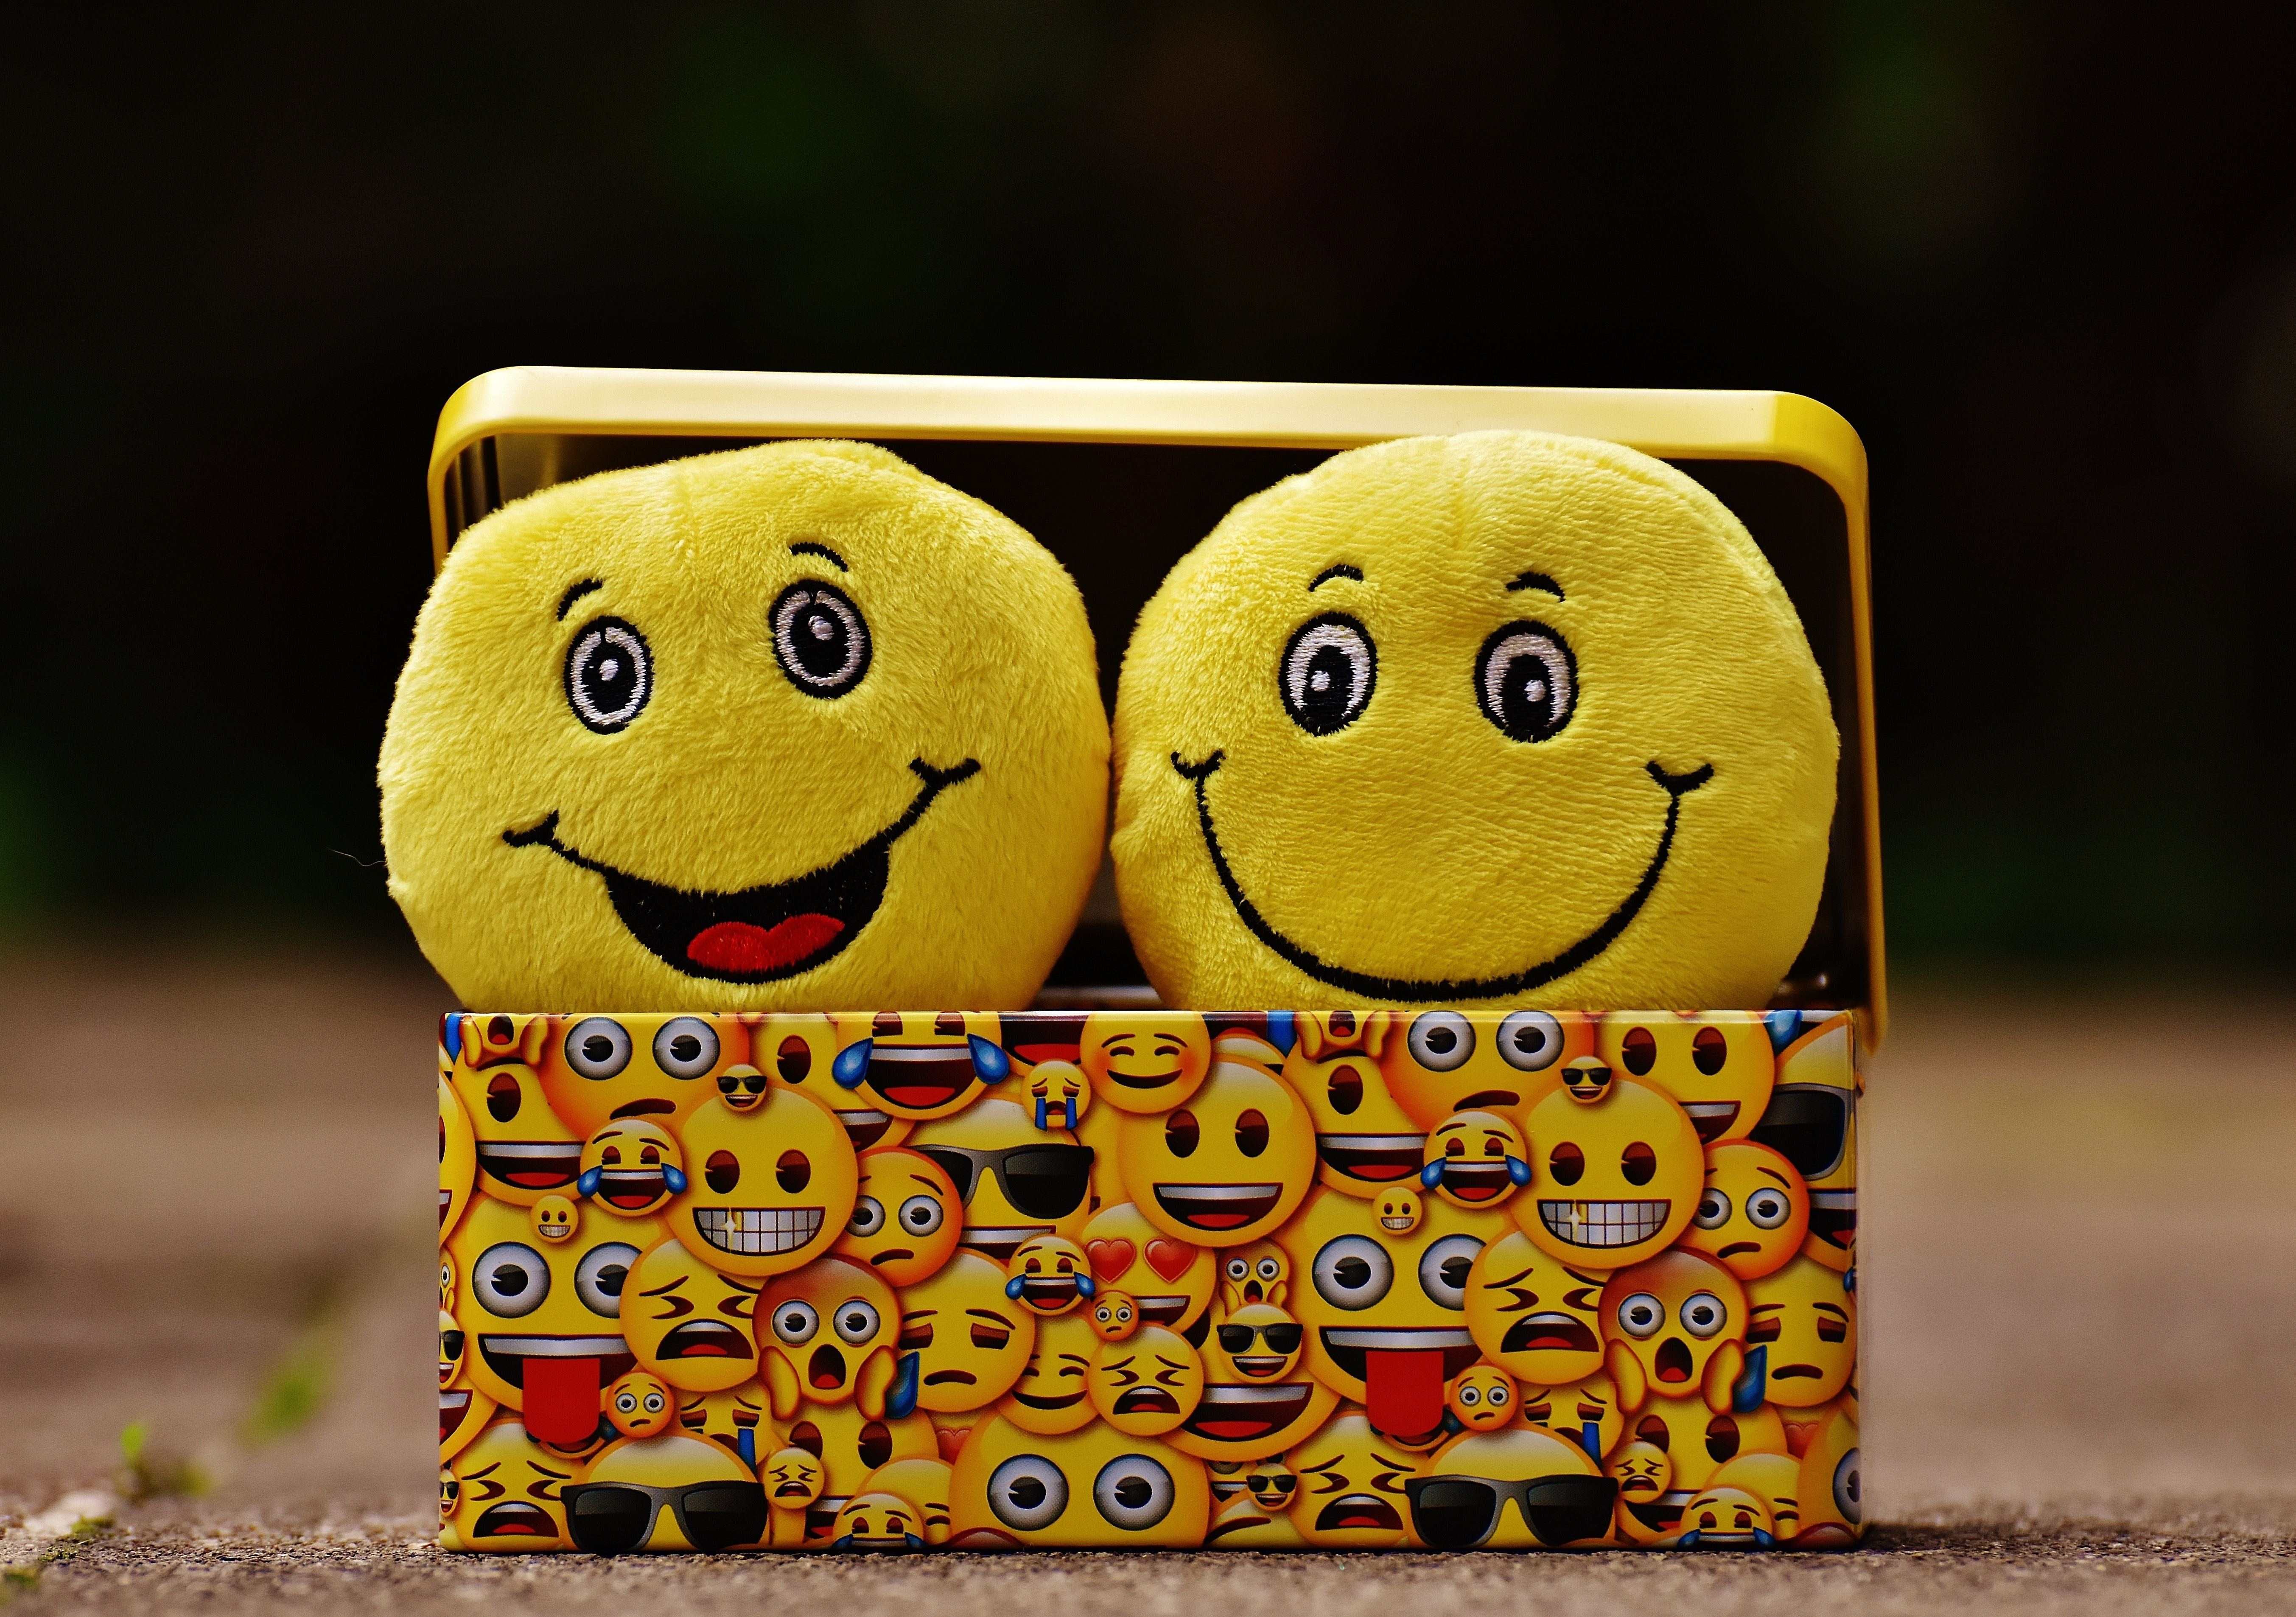 HD wallpaper, Emoticons, 5K, Smileys, Yellow Box, Cute Expressions, Happiness, Smiling, Cheerful, Yellow, Emoji